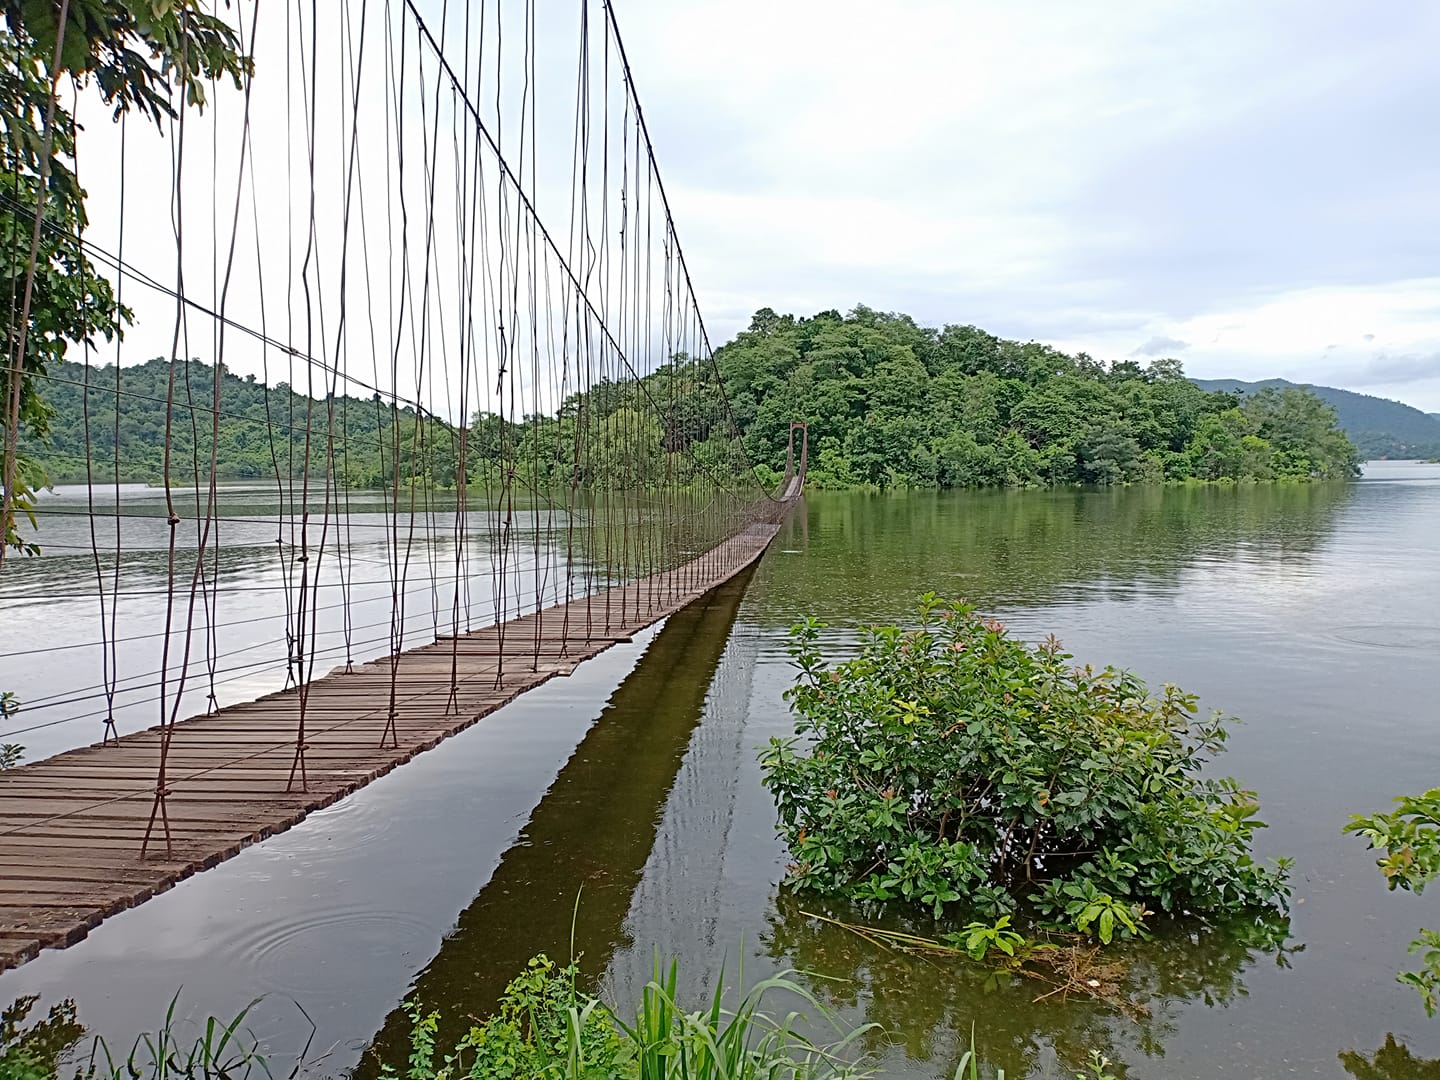 The suspension bridge, one of the major tourist attractions inside Kaeng Krachan National Park, where parts of the missing activist were found. Photo: Kaeng Krachan National Park / Facebook